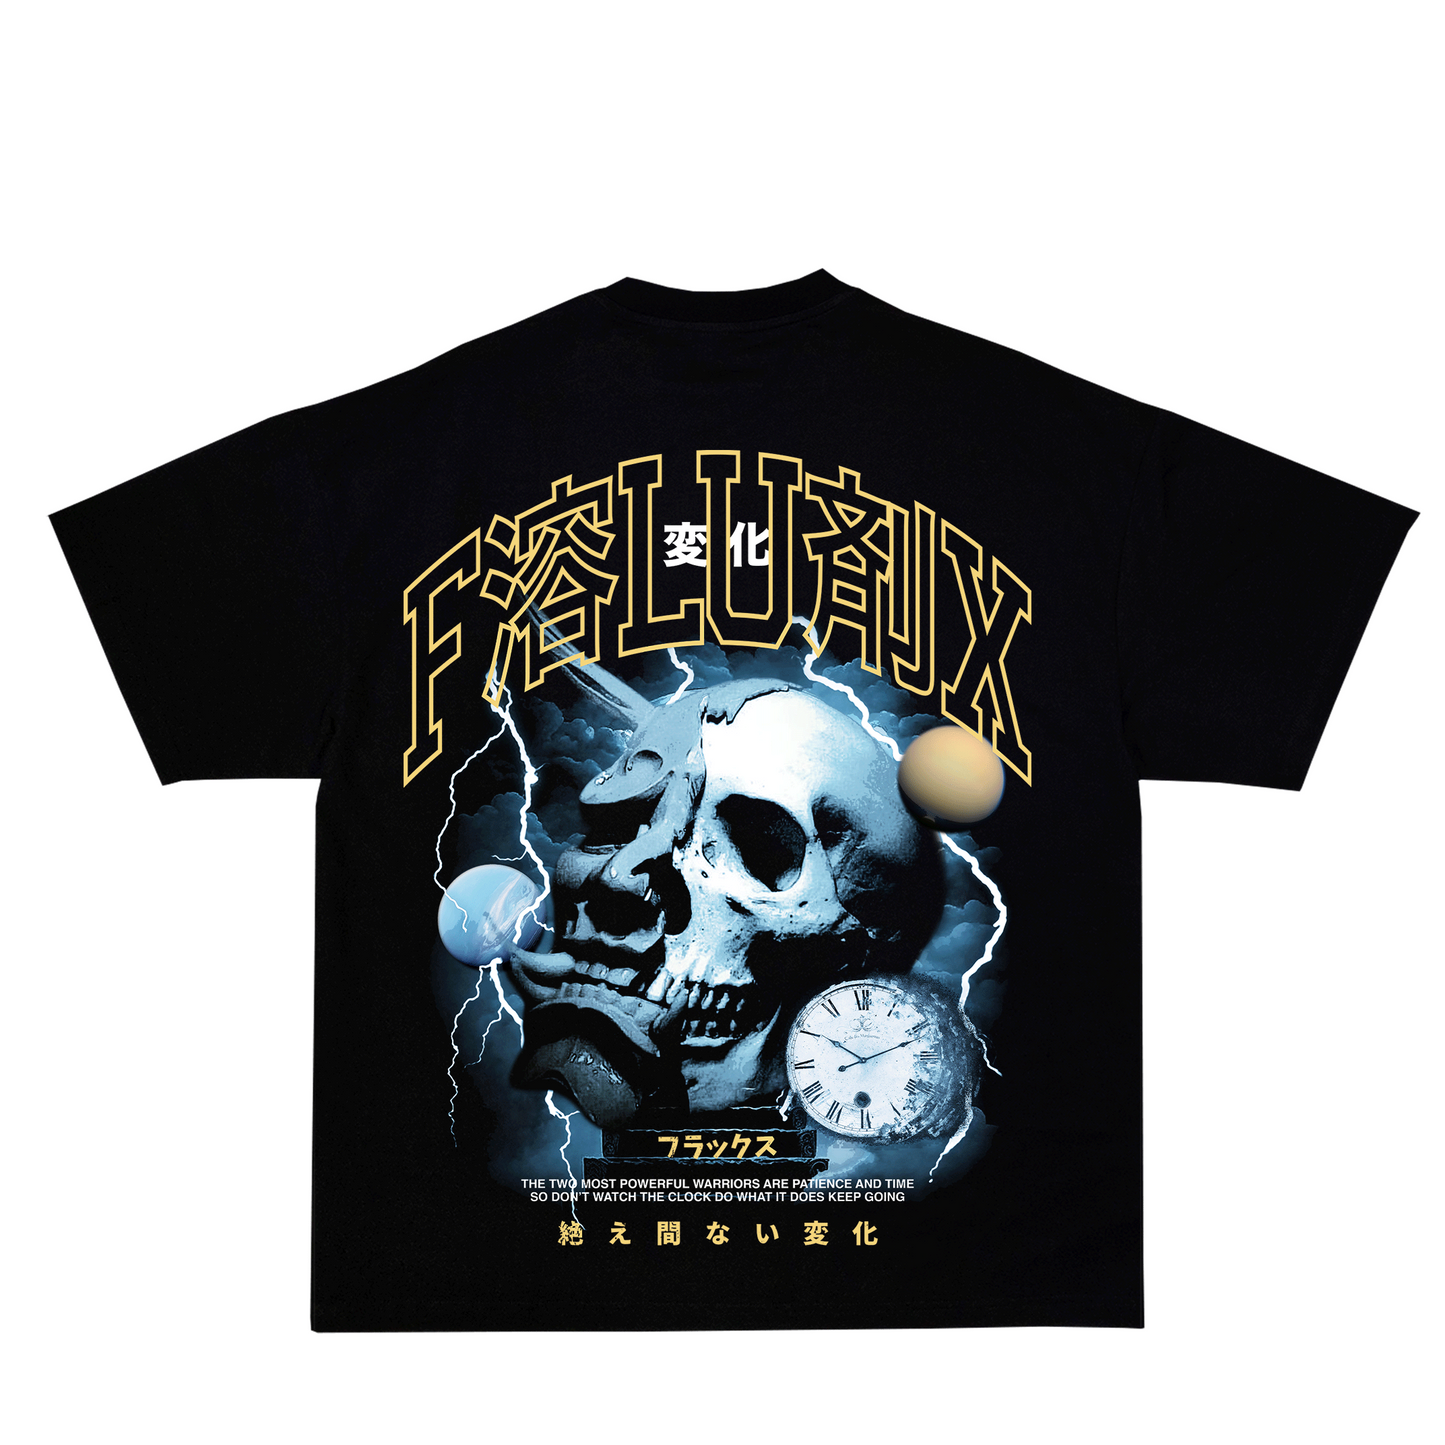 "Death within yourself" Graphic T-Shirt